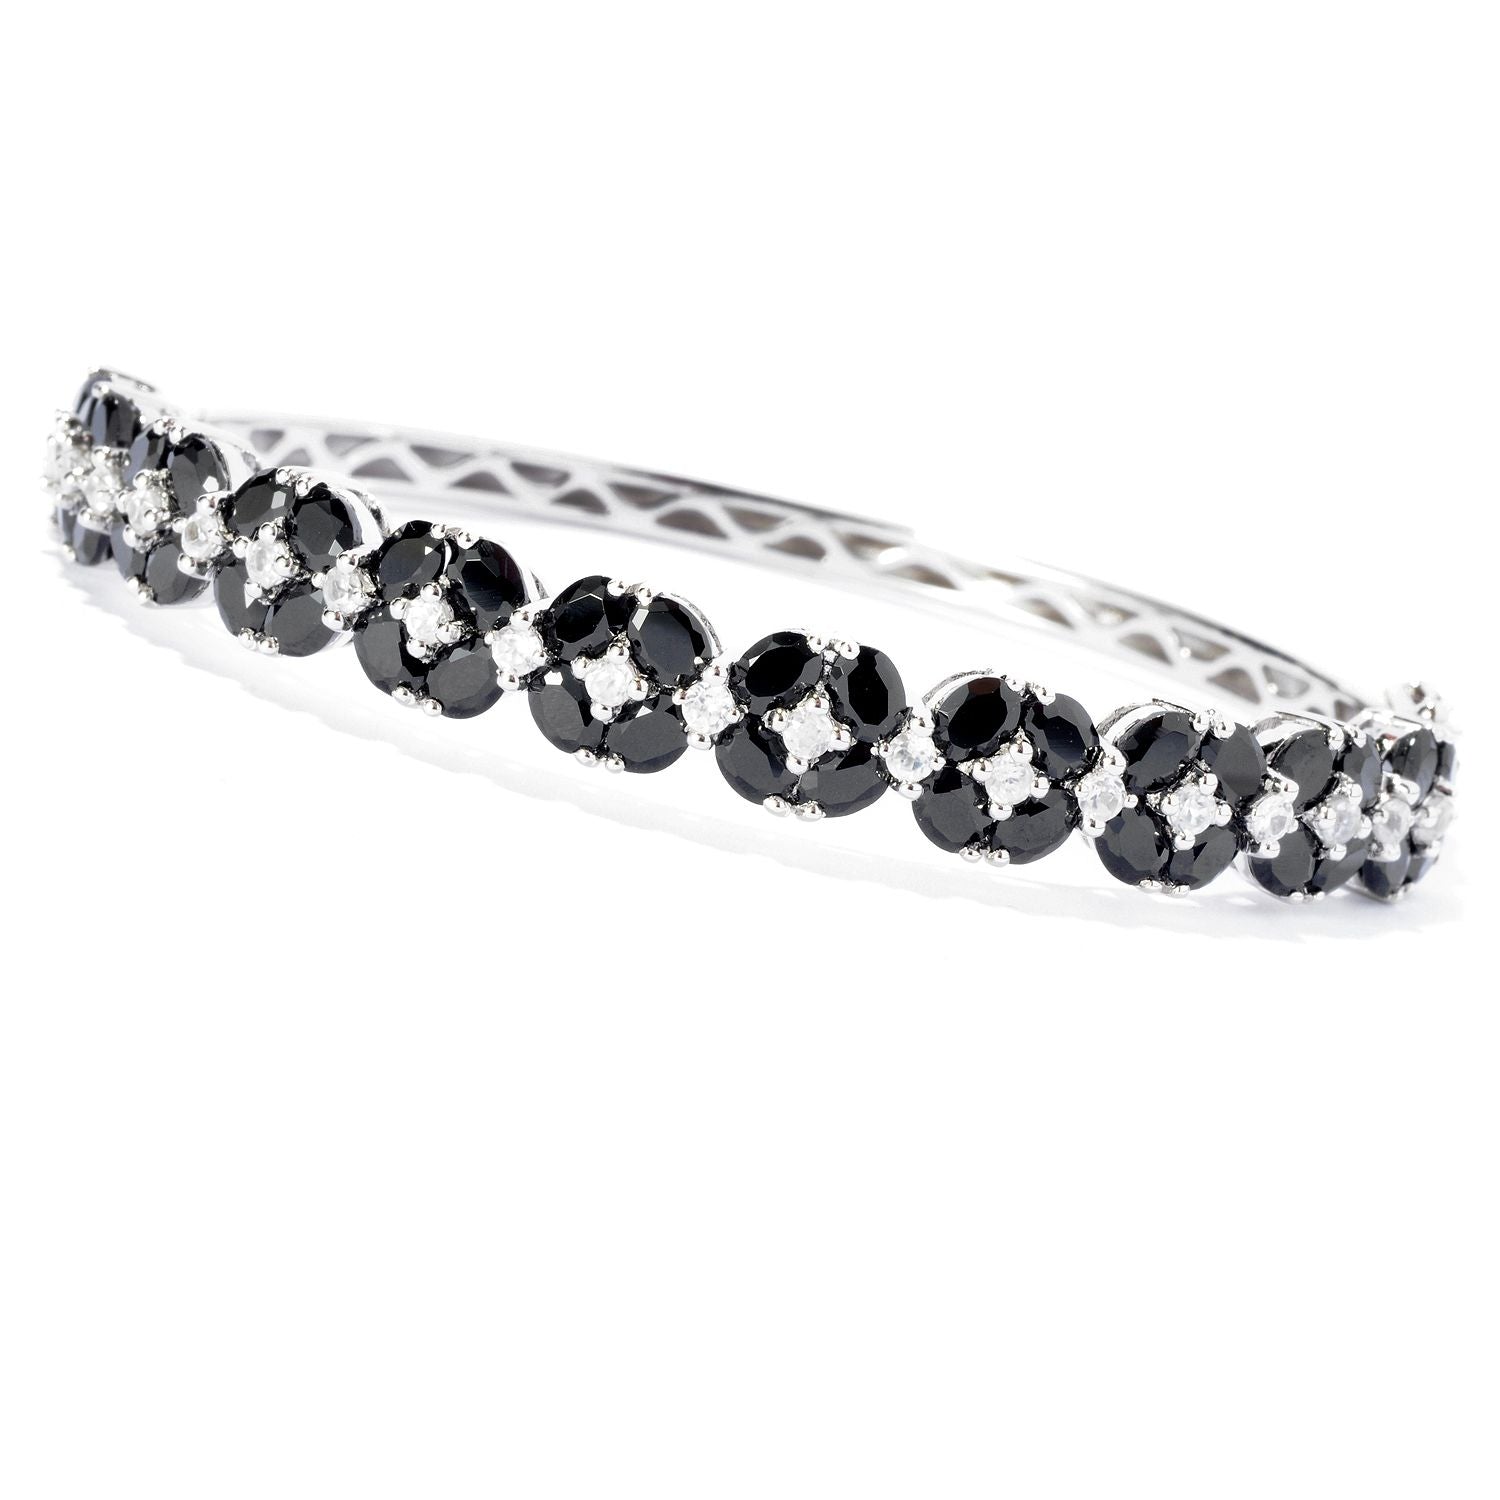 Pinctore Sterling Silver Black Spinel and Cubic Zirconia Hinged Bracelet, 6.5"